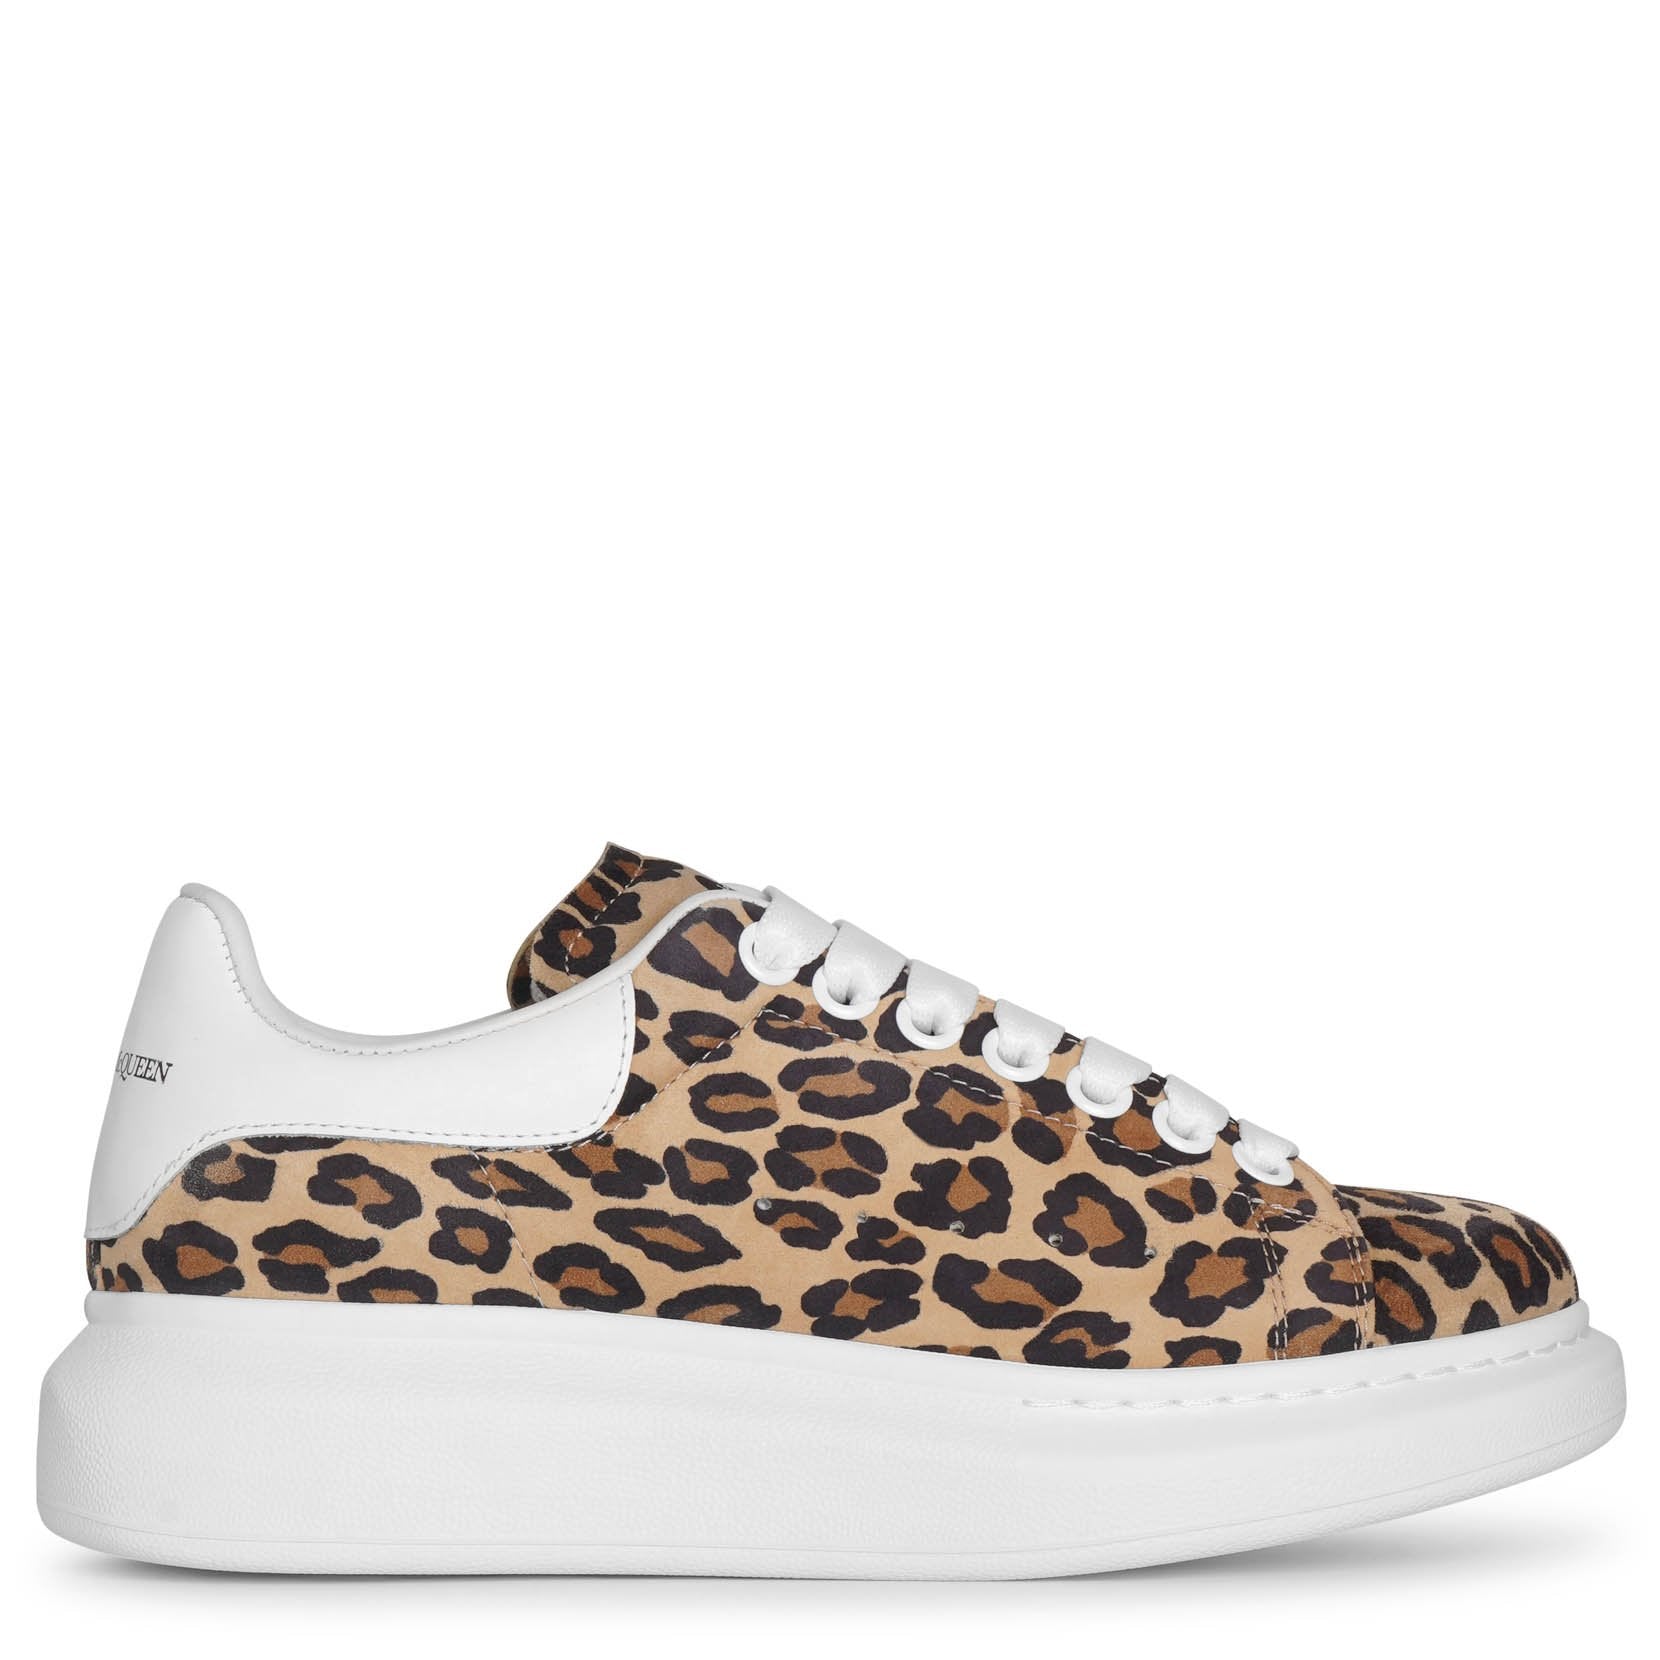 Leopard suede classic sneakers